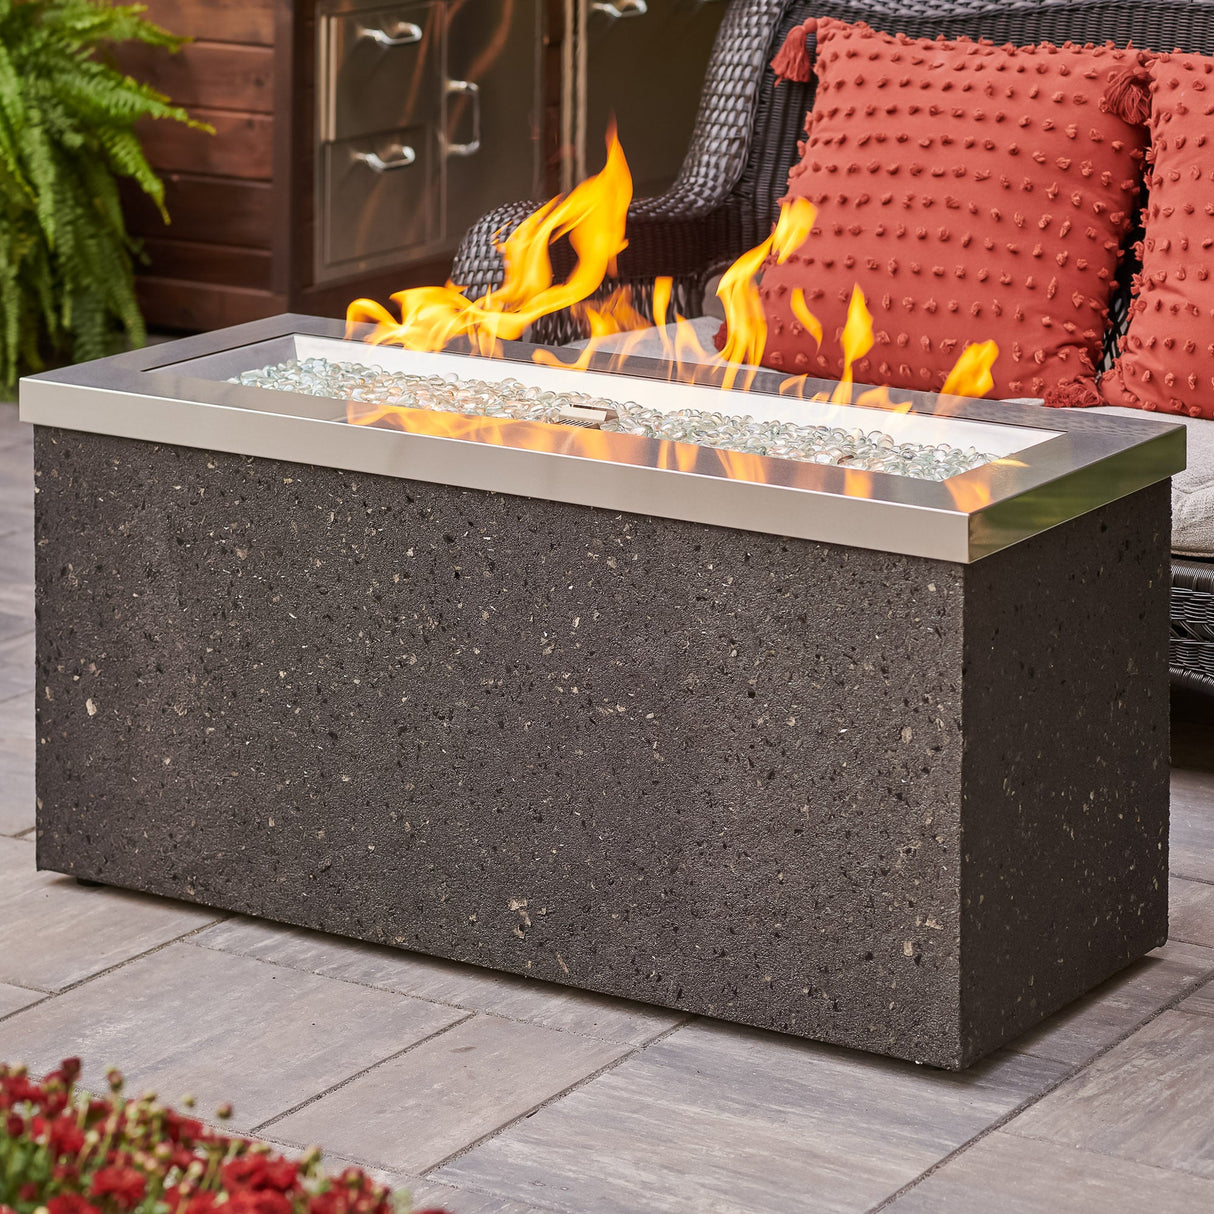 Close up of the flame coming from the burner of the Stainless Steel Key Largo Linear Gas Fire Pit Table